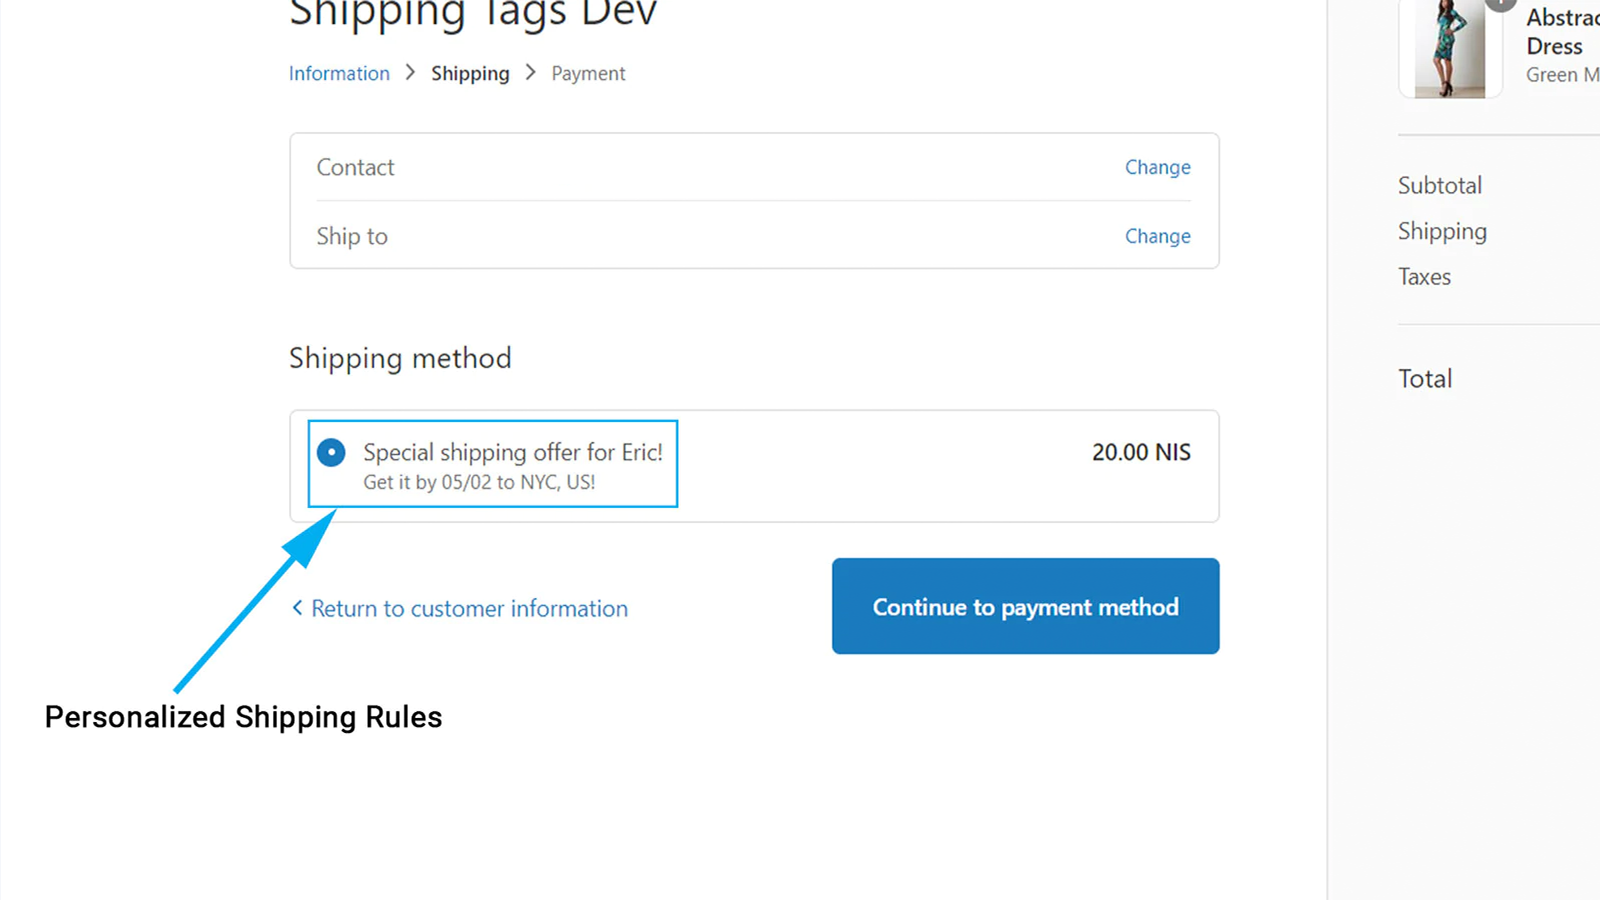 Show custom shipping rates at checkout using product tags